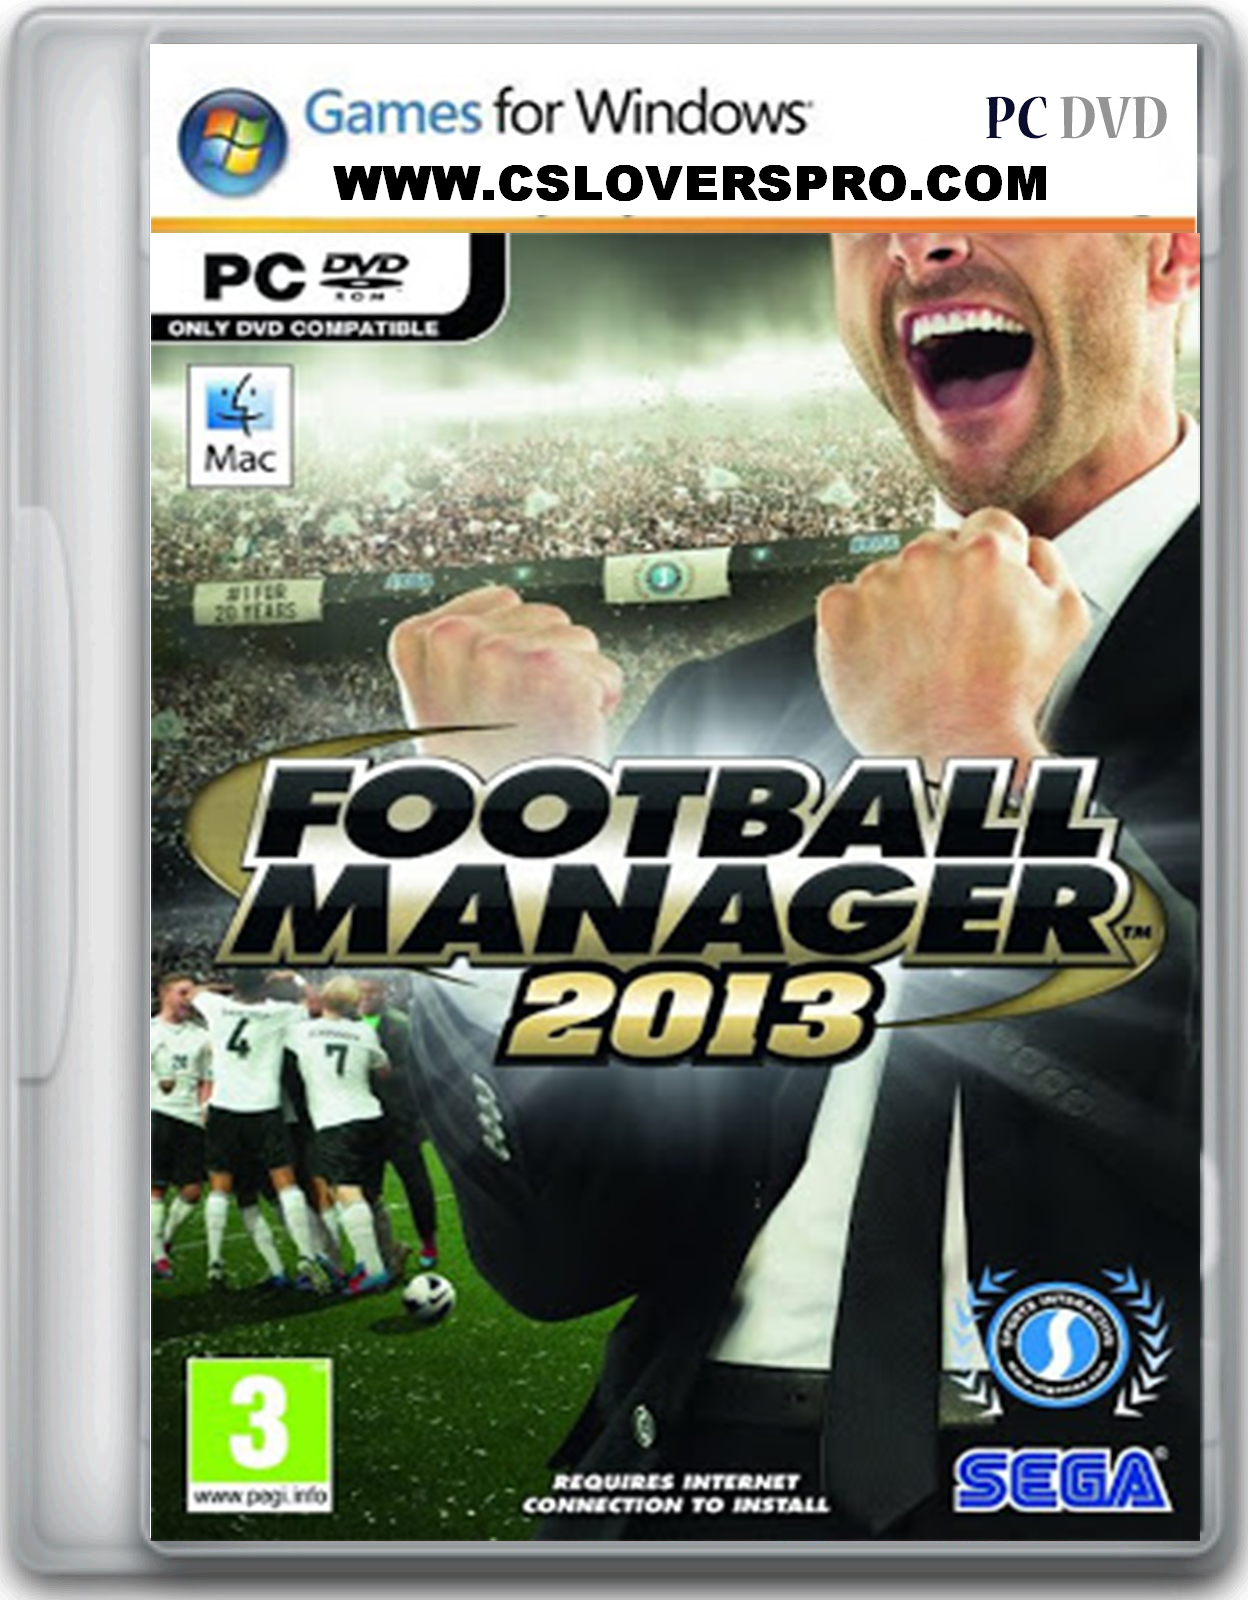 Soccer Manager Hack Tools Sm Credits Full Version Software